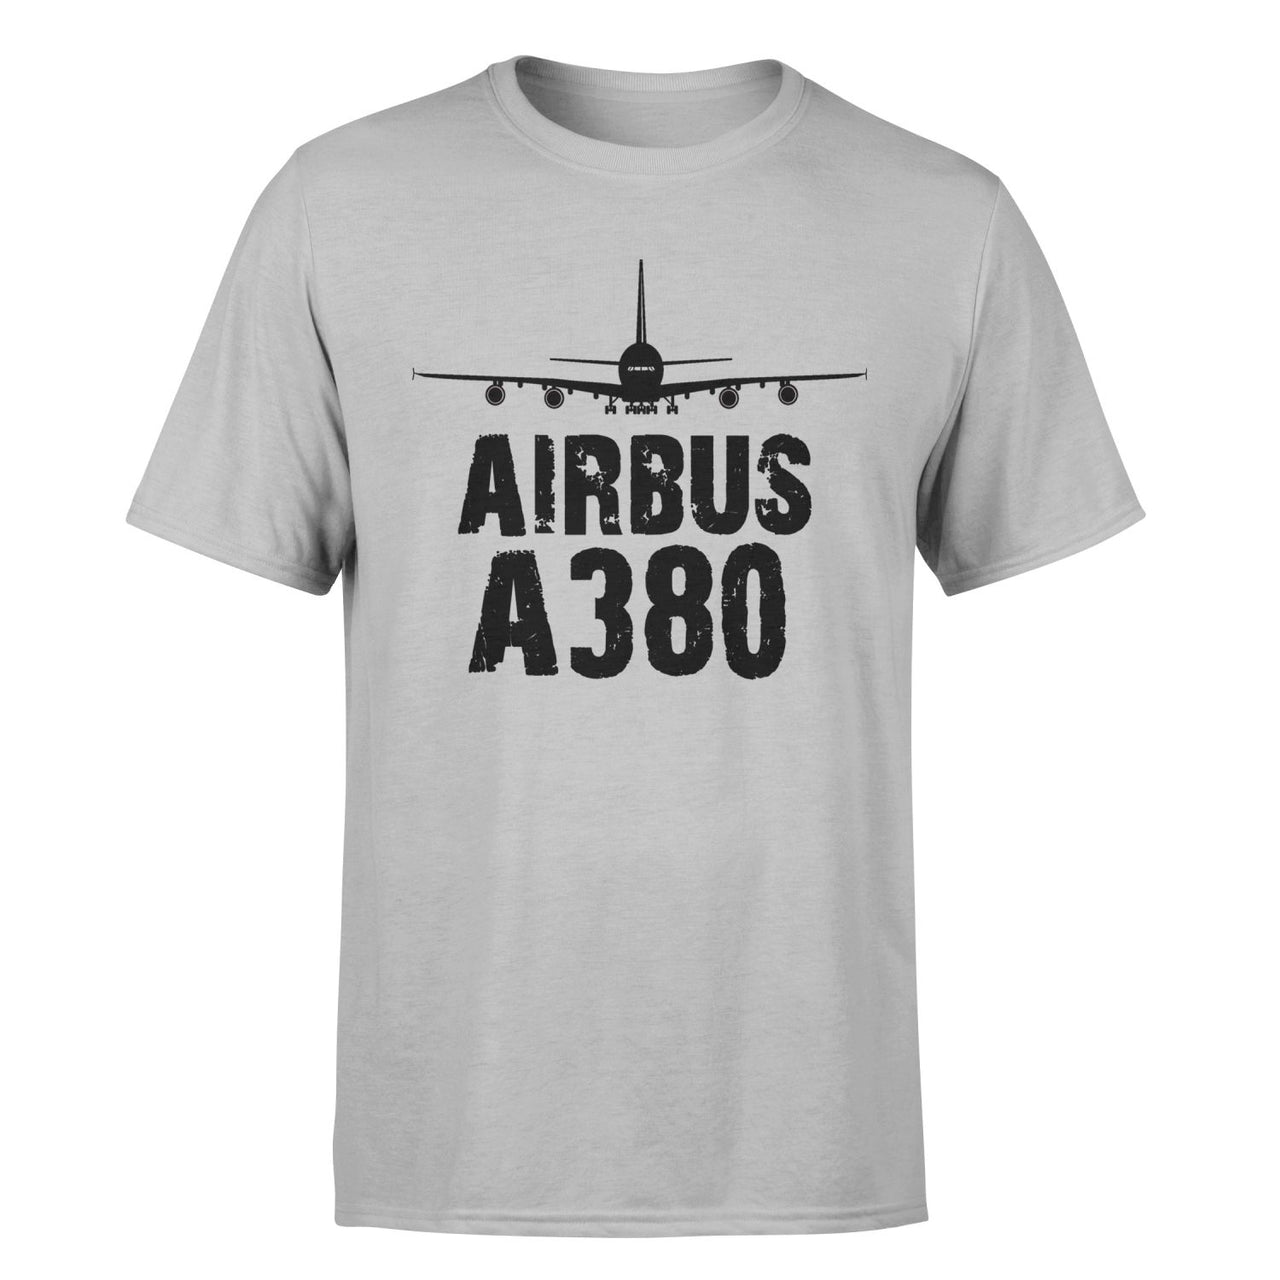 Airbus A380 & Plane Designed T-Shirts